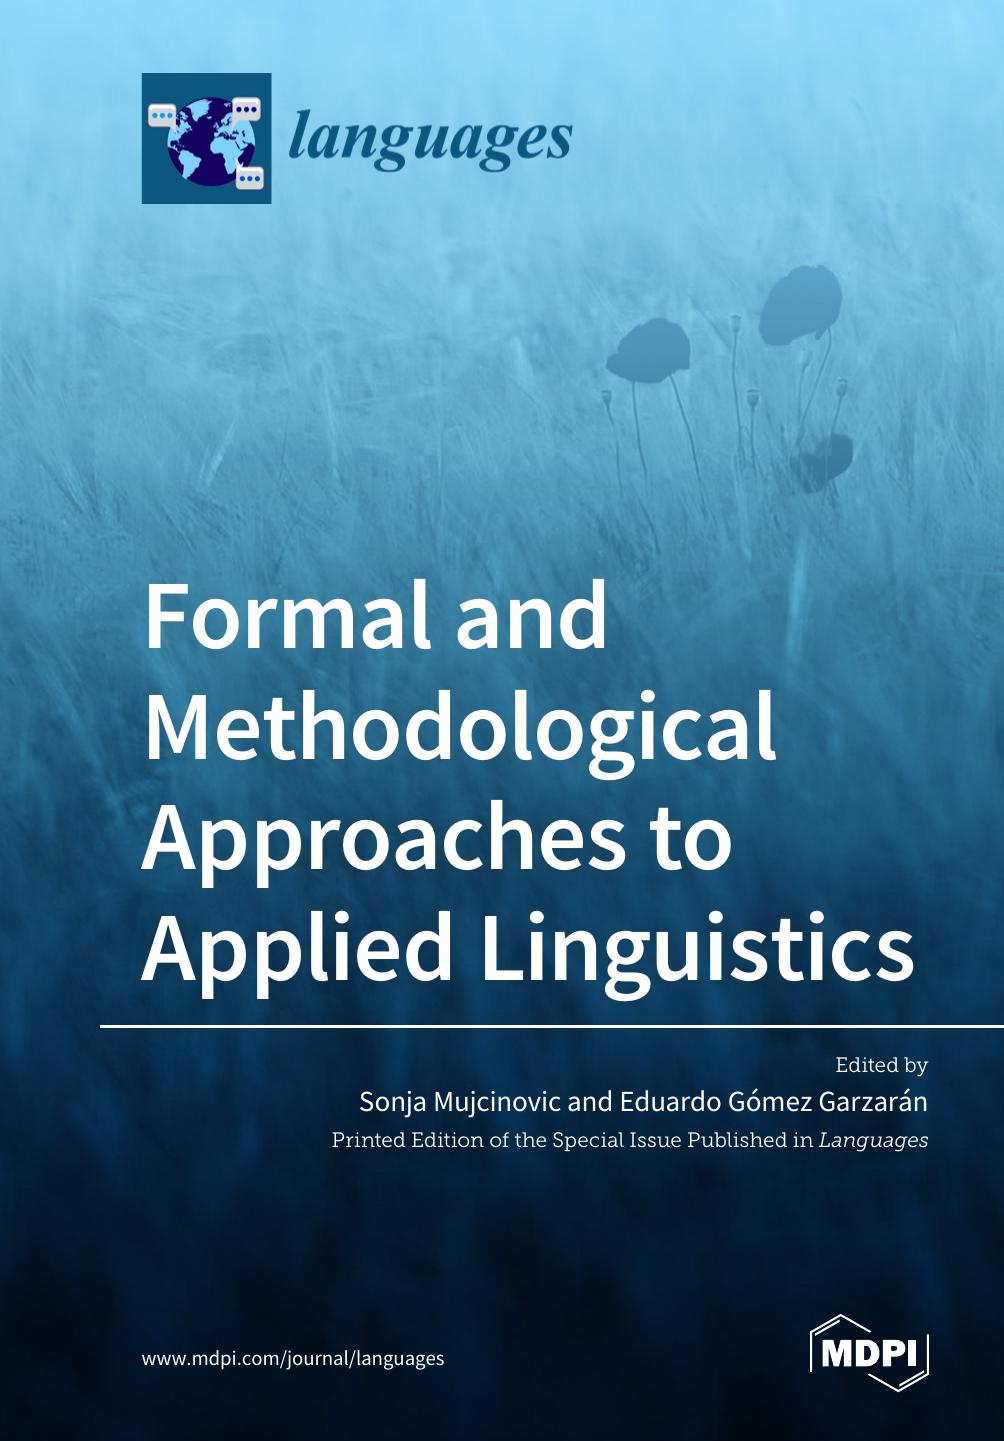 Formal and Methodological Approaches to Applied Linguistics